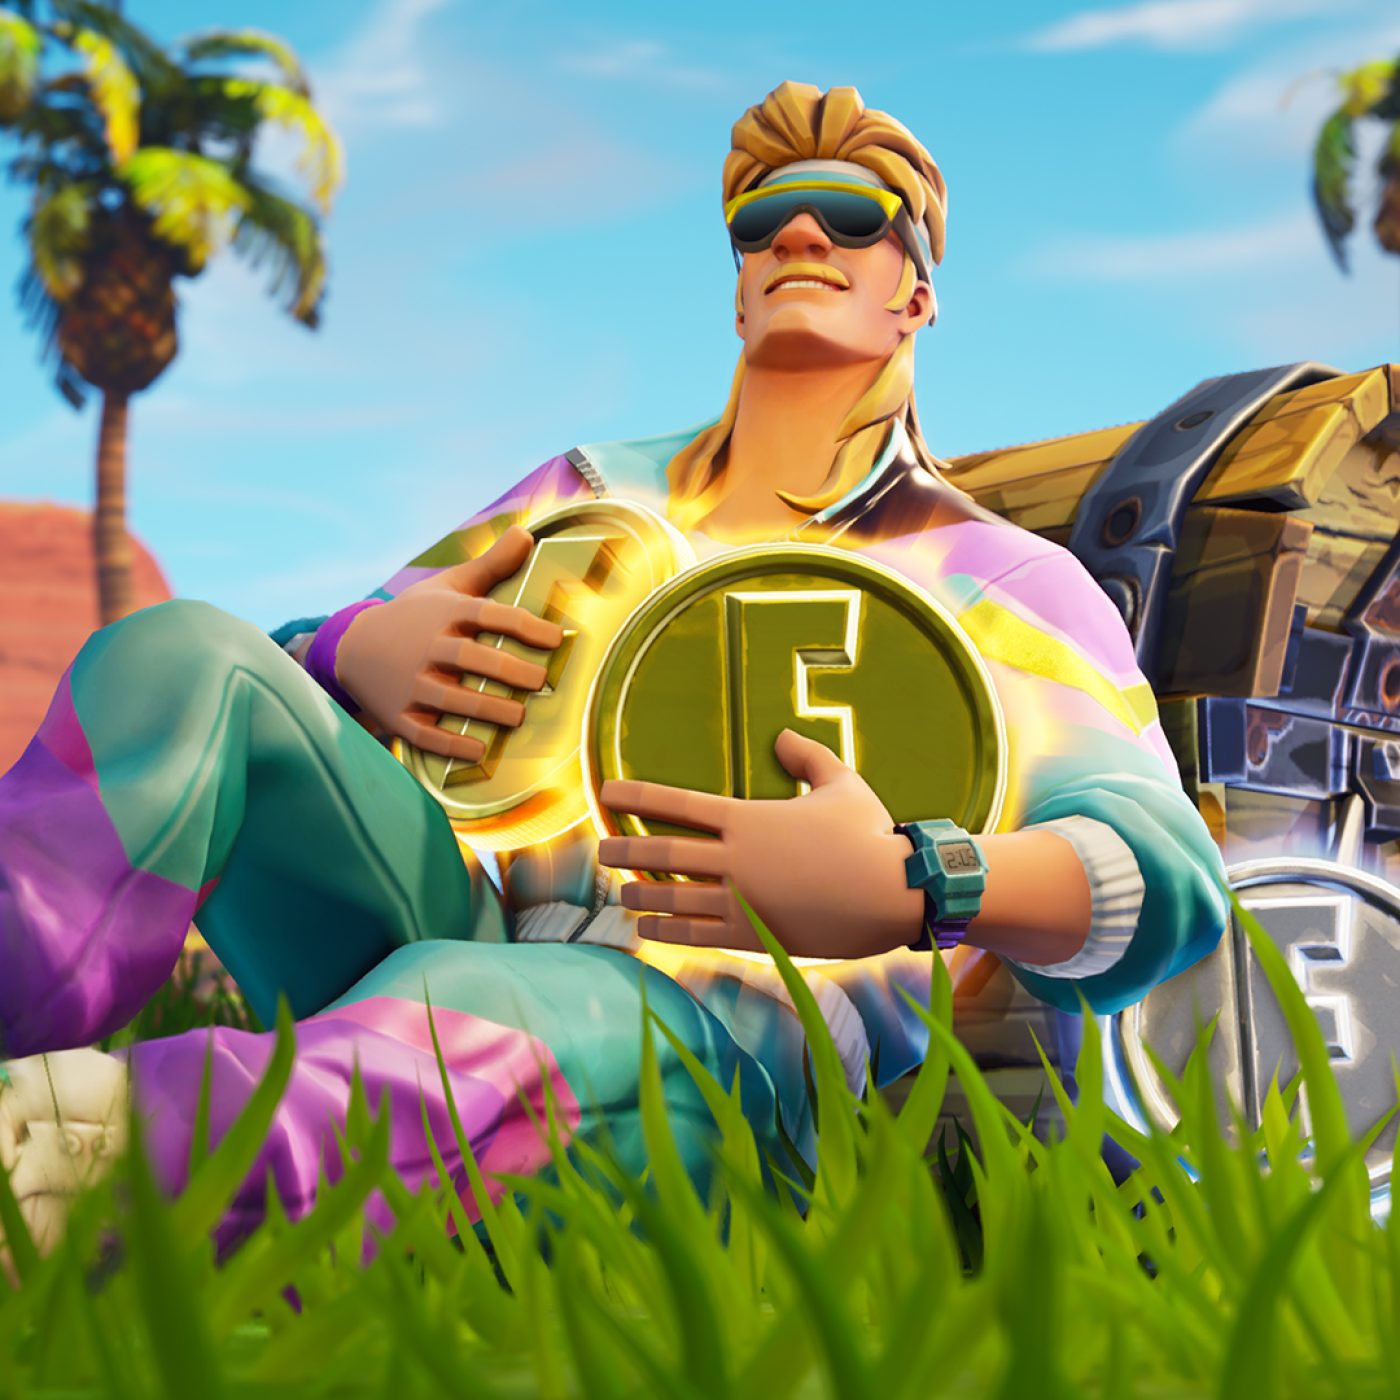 Will Apple's iOS 14 update delete Fortnite? Epic warns against